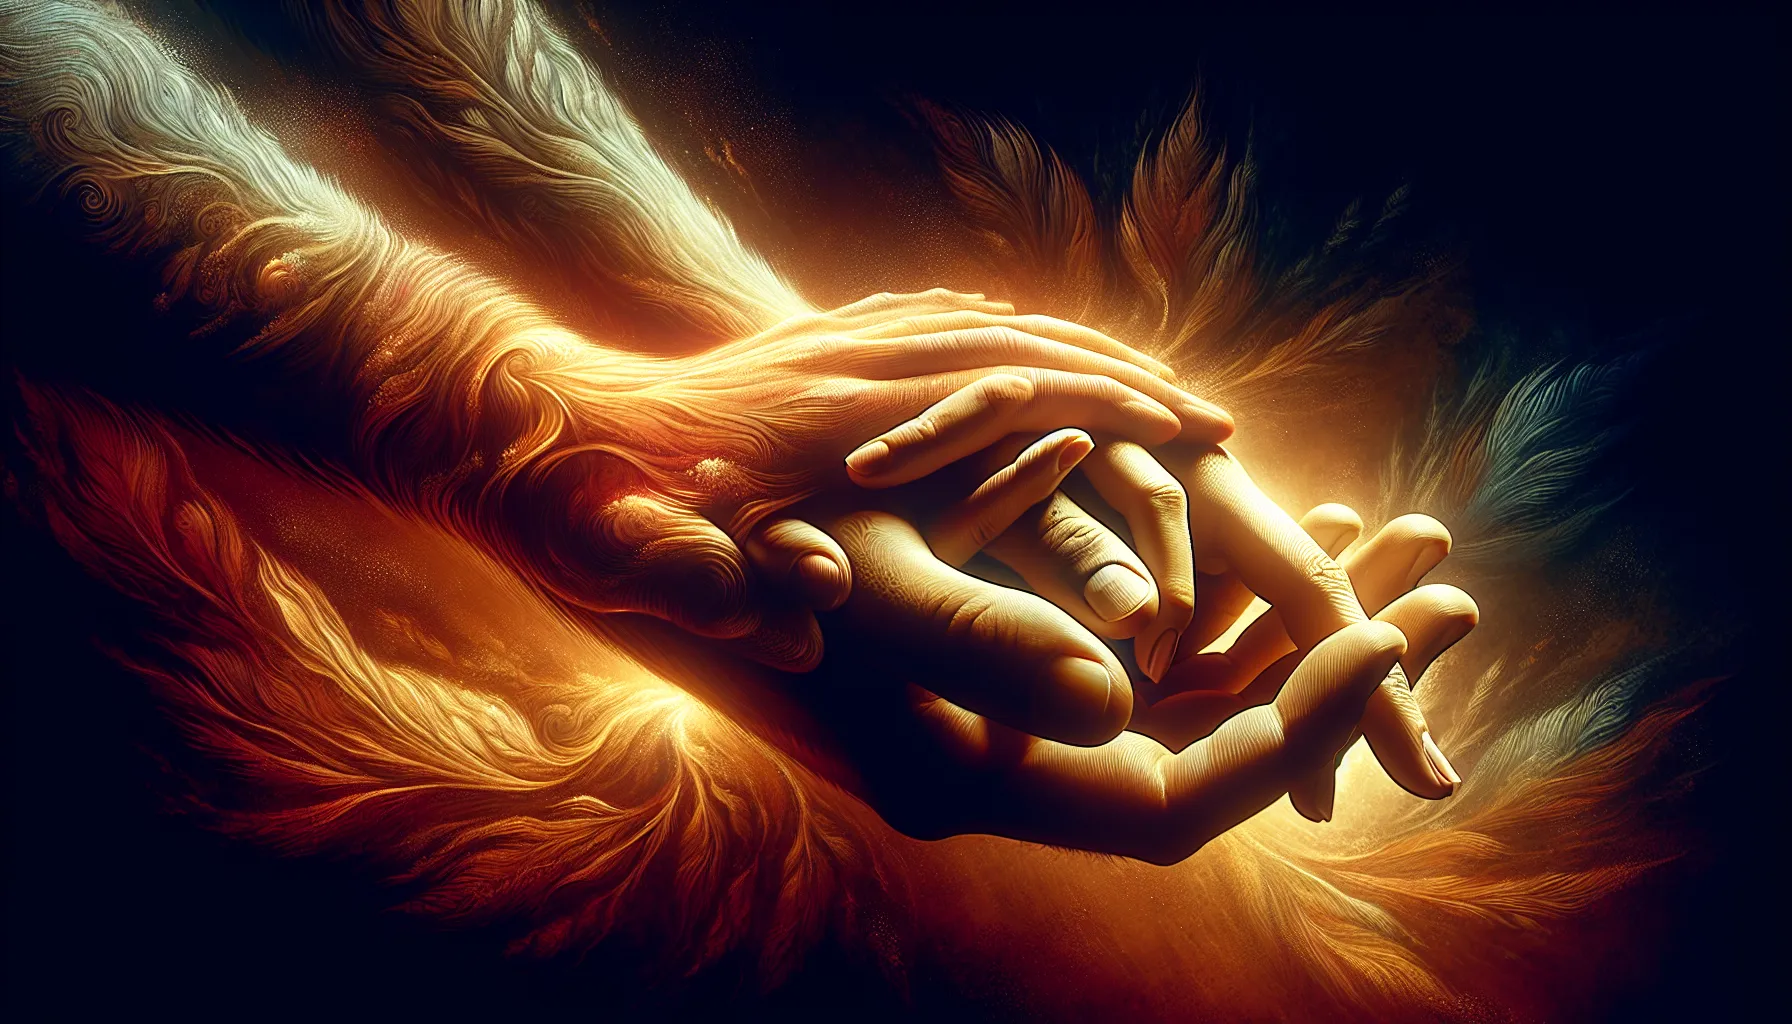 <strong>Entwined in Trust:</strong> A depiction of hands clasped together, symbolizing the unspoken promise and unwavering support that form the bedrock of a loving, trusting relationship.